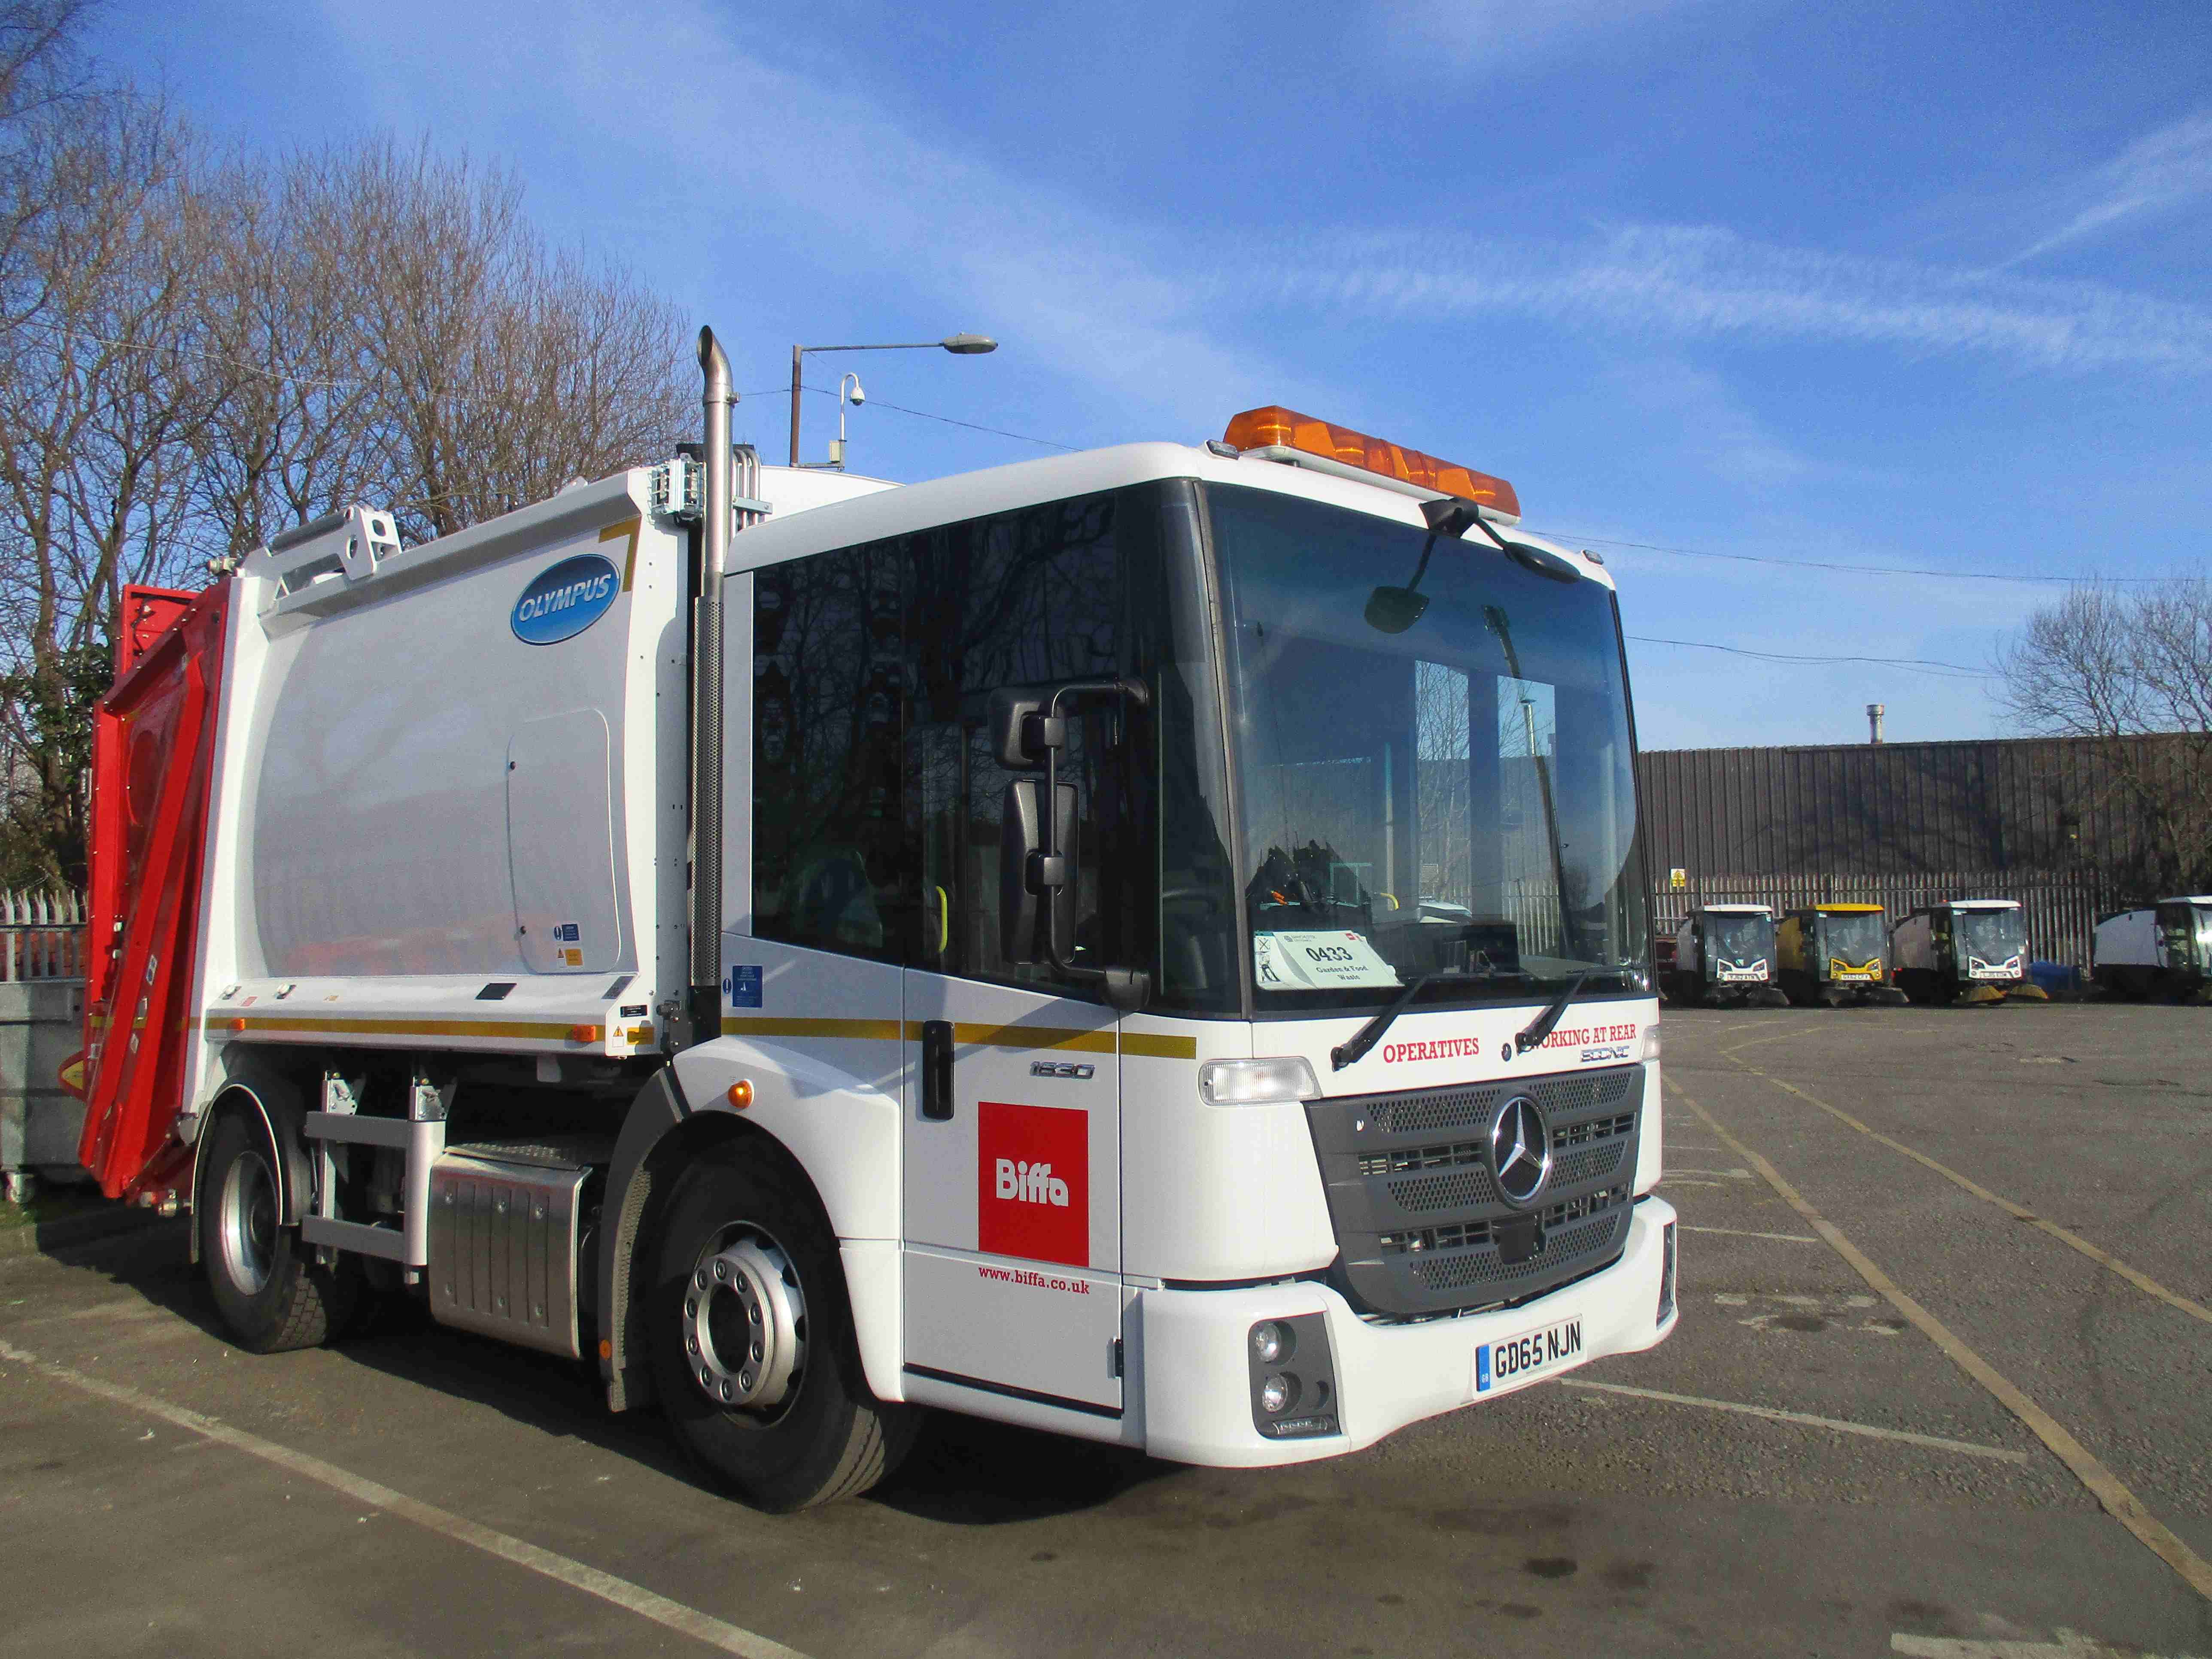 Biffa invests in Manchester waste fleet - letsrecycle.com5152 x 3864